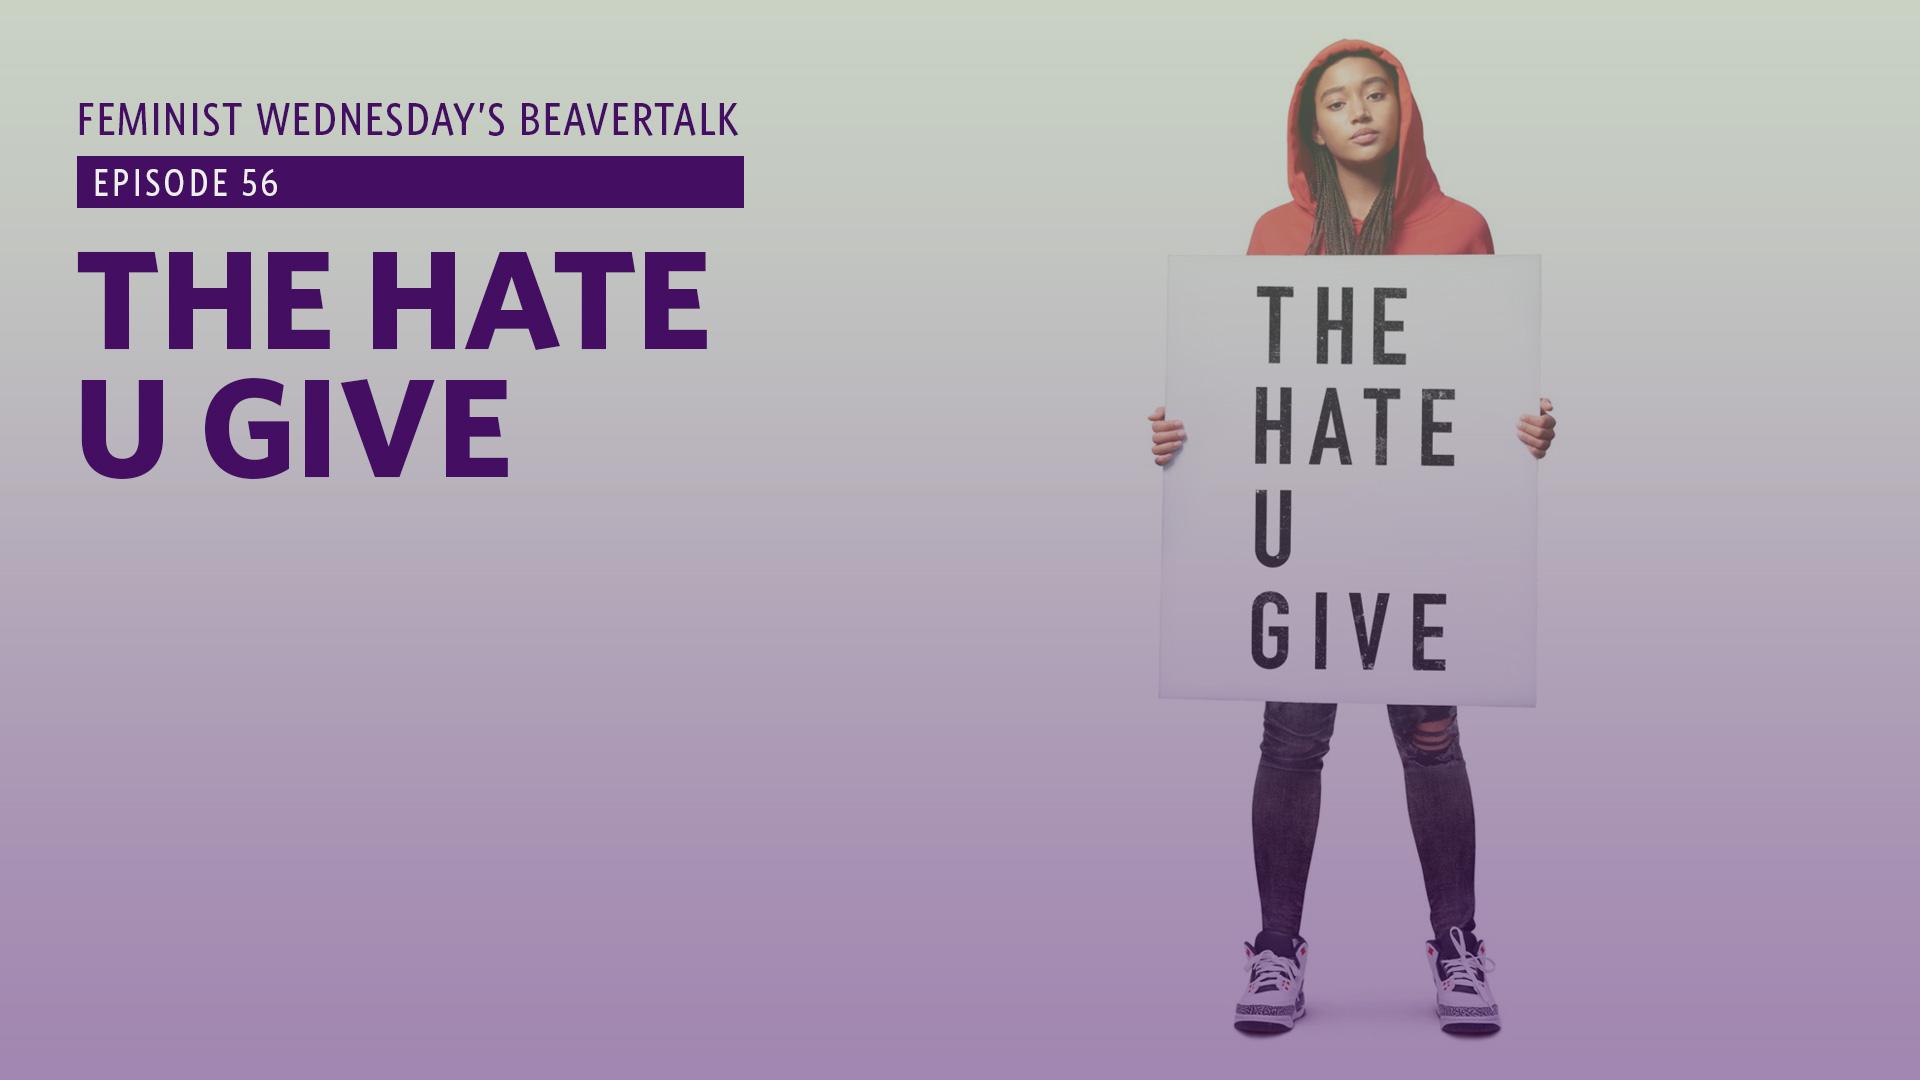 The Hate U Give by Beavertalk. The Atlantic Transmission Podcast